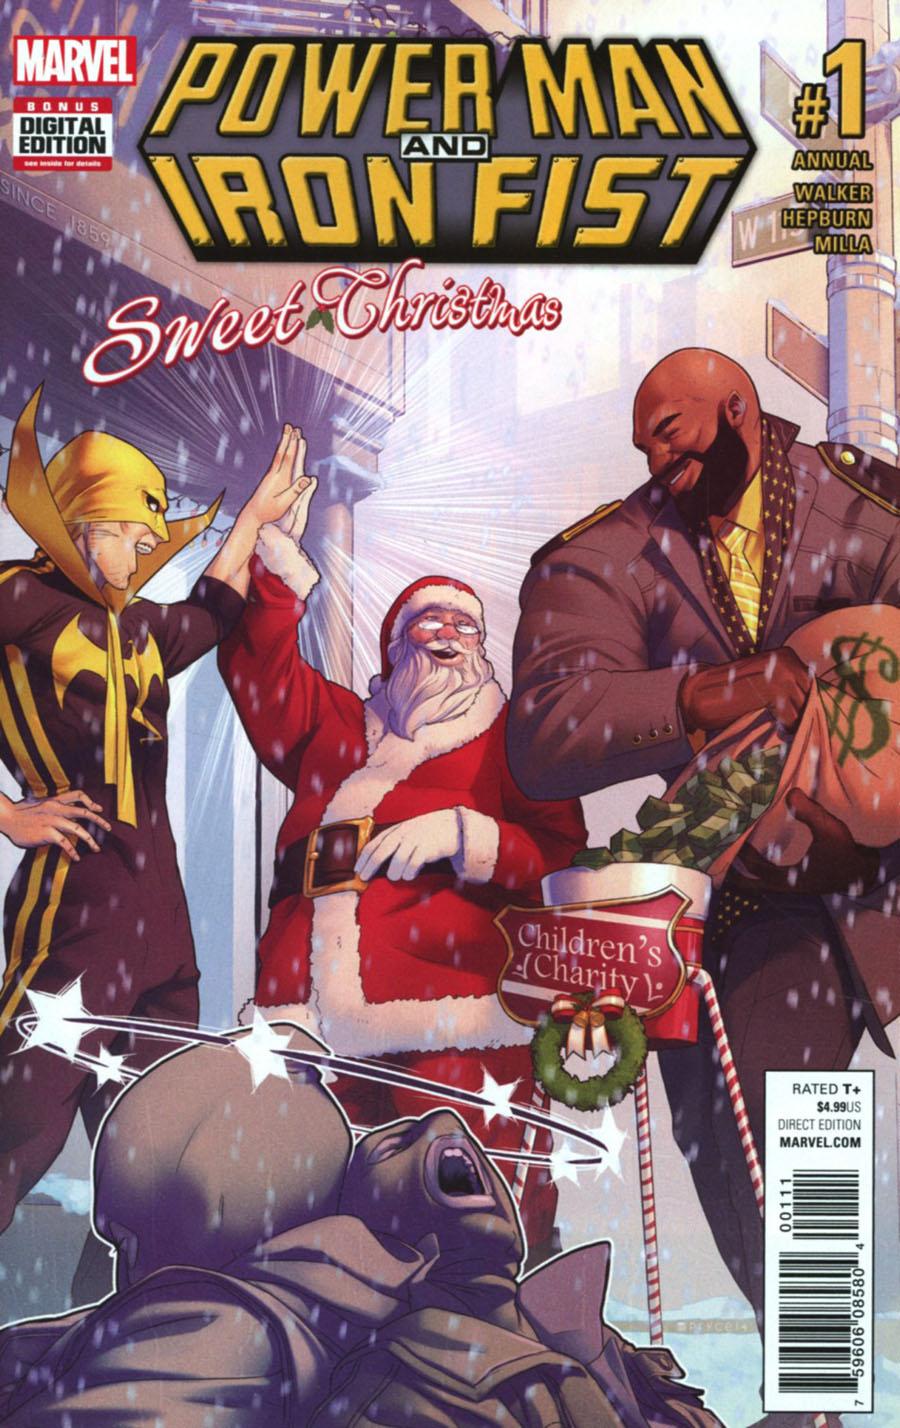 Power Man and Iron Fist Vol. 3 Sweet Christmas Annual #1